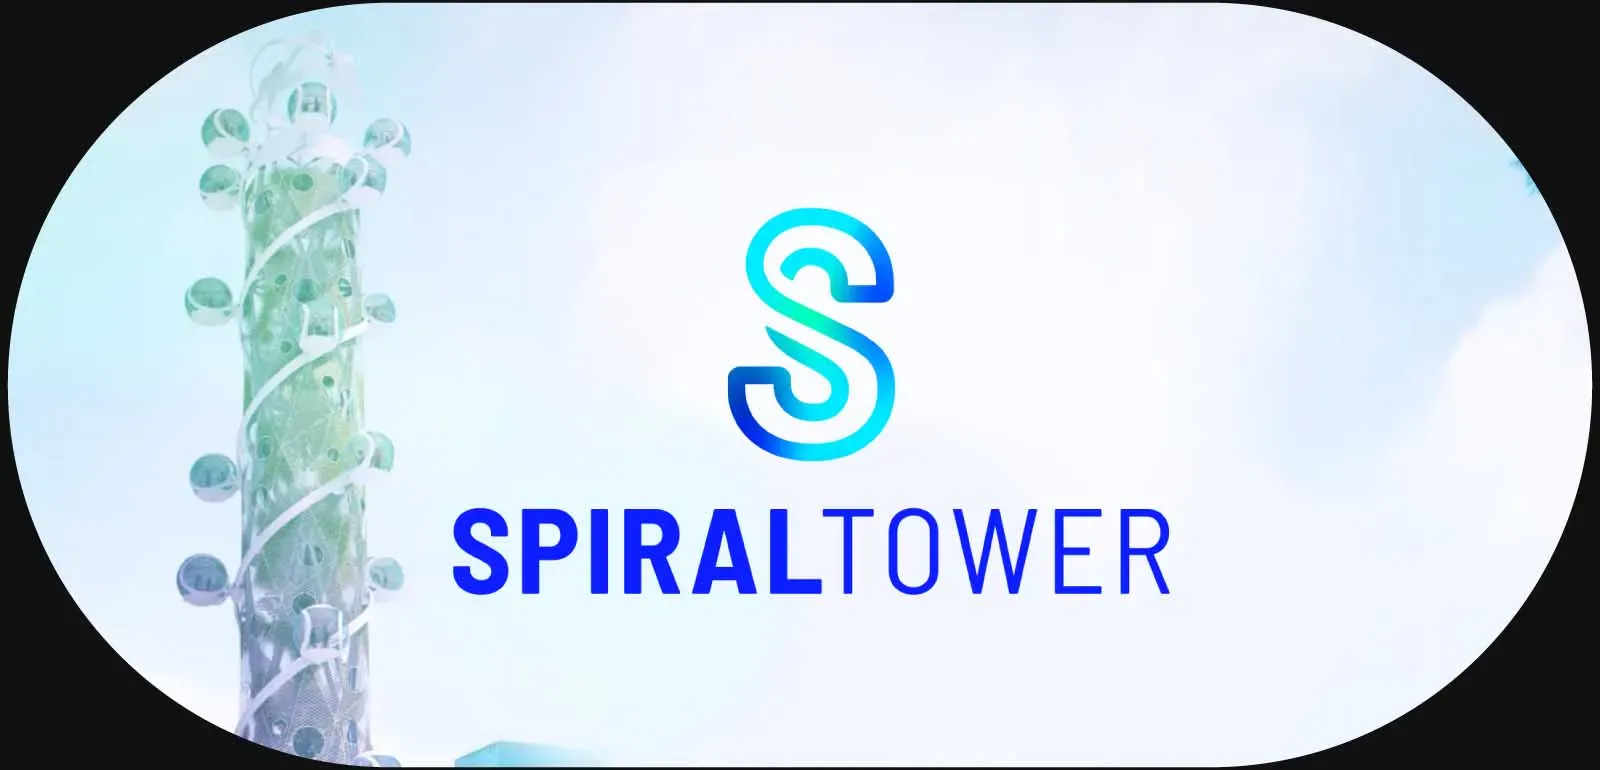 Spiral Tower - The first energy neutral high-rise attraction in the world